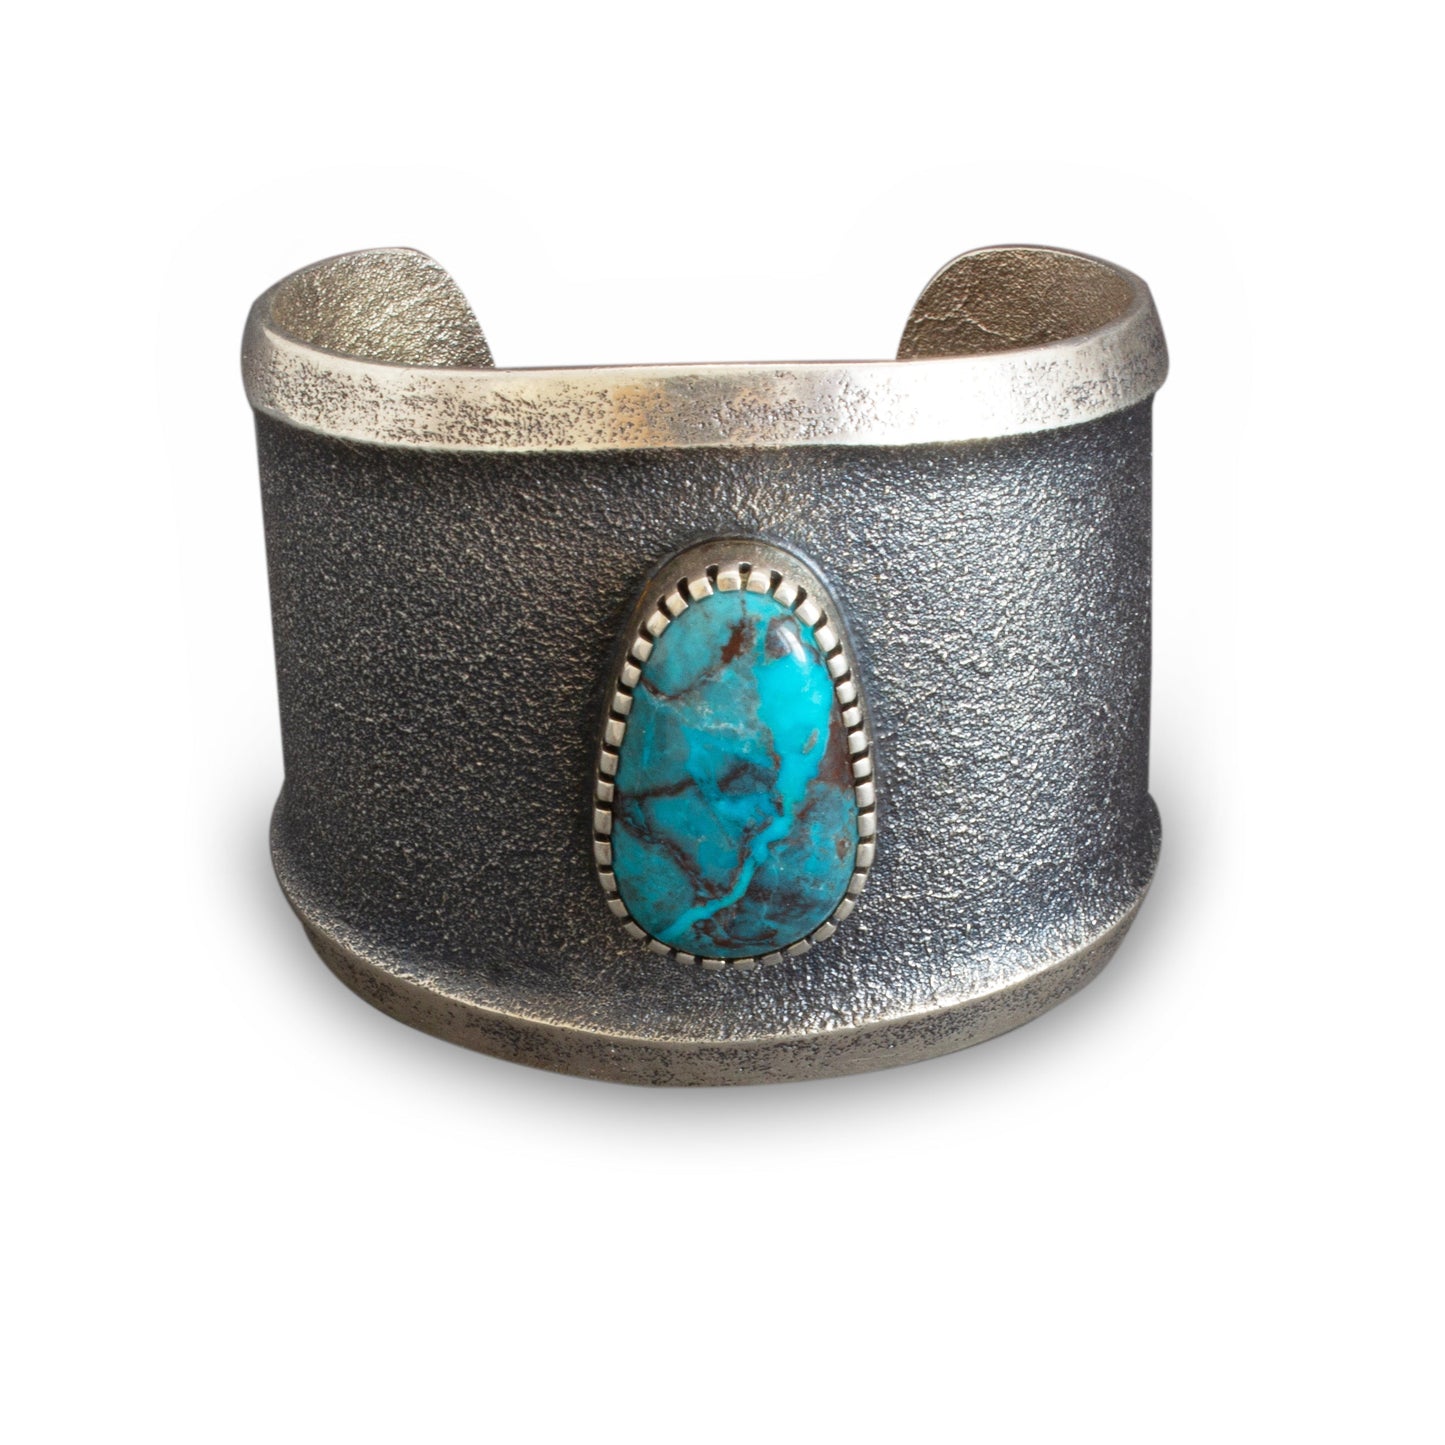 Ric Charlie Wide Silver Cuff With Center Turquoise - Turquoise & Tufa